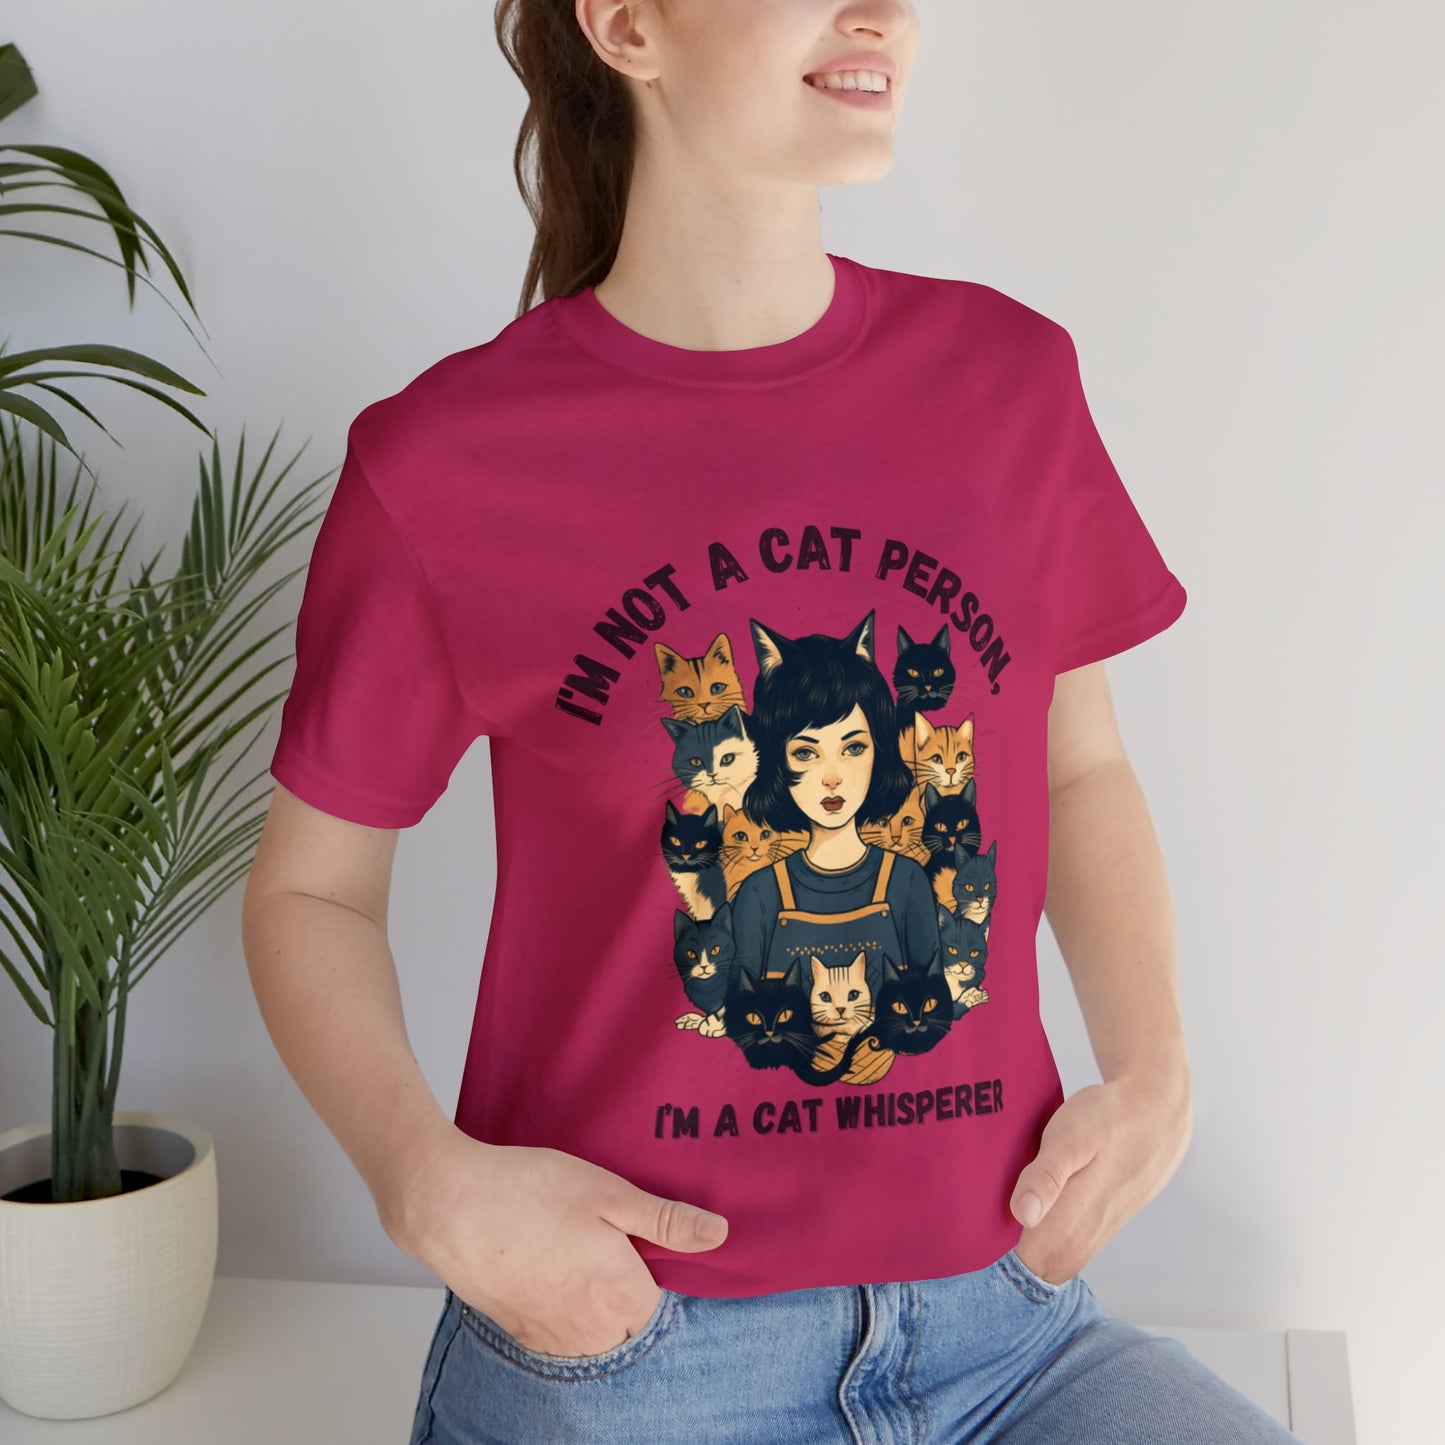 I'm not a cat person, I'm a Cat Whisperer Tee Shirt |  Funny Unisex Short Sleeve Tee | Funny Cat Shirt - CrazyTomTShirts